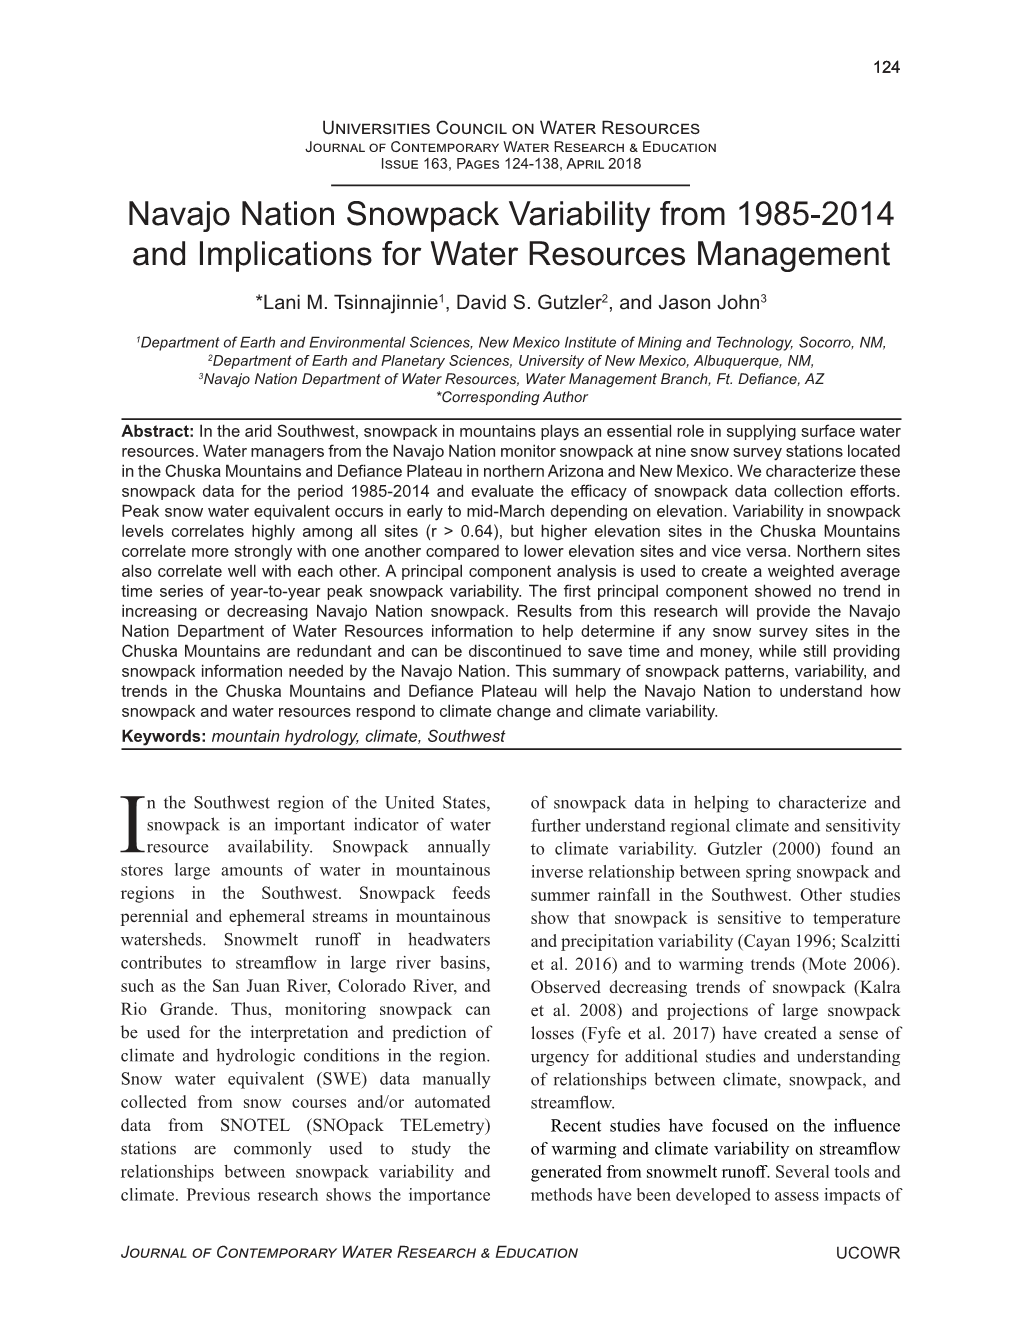 Navajo Nation Snowpack Variability from 1985-2014 and Implications for Water Resources Management *Lani M